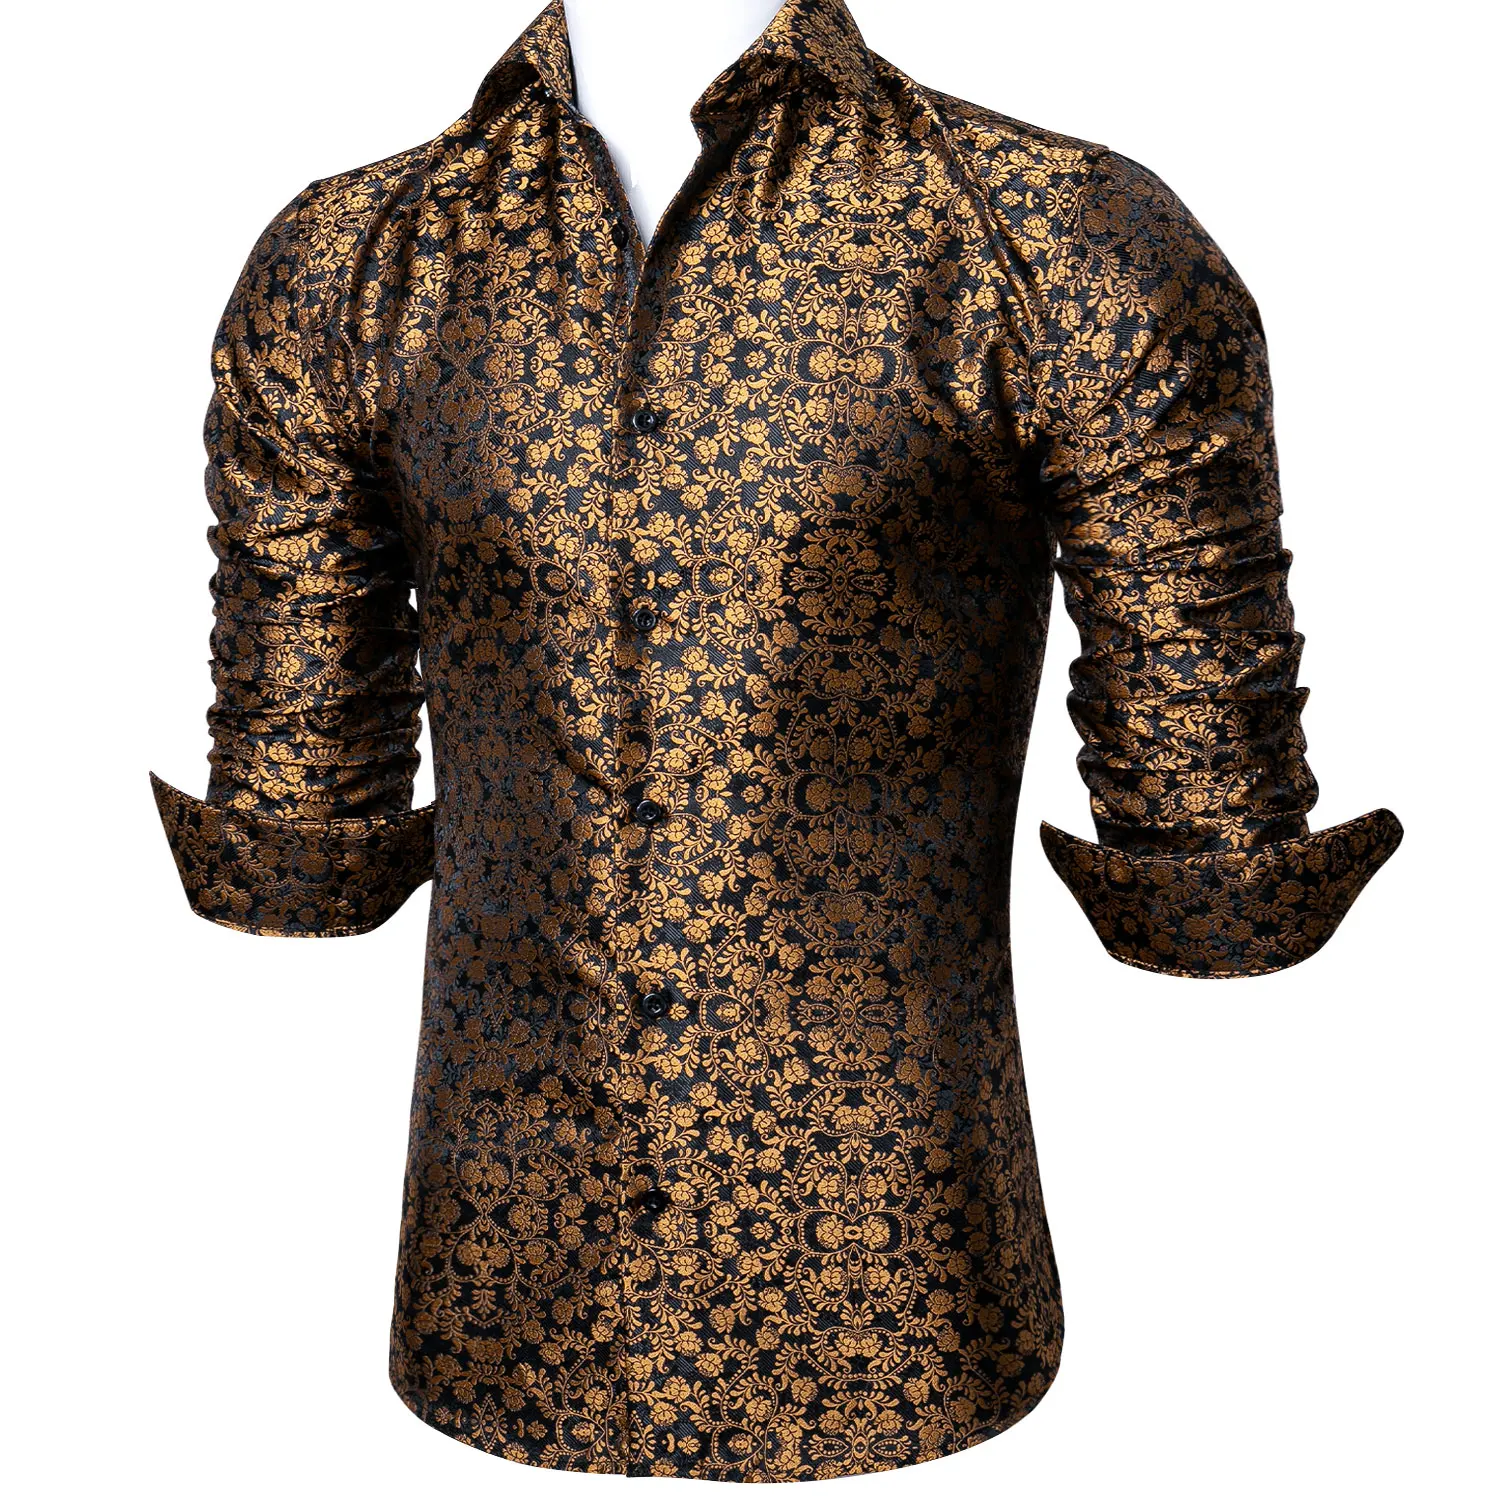 New Luxury Gold Silk Shirt Men Vintage Long Sleeve Shirt Paisley Floral Spring Autumn Casual Fit-Dress Party Male Barry.Wang